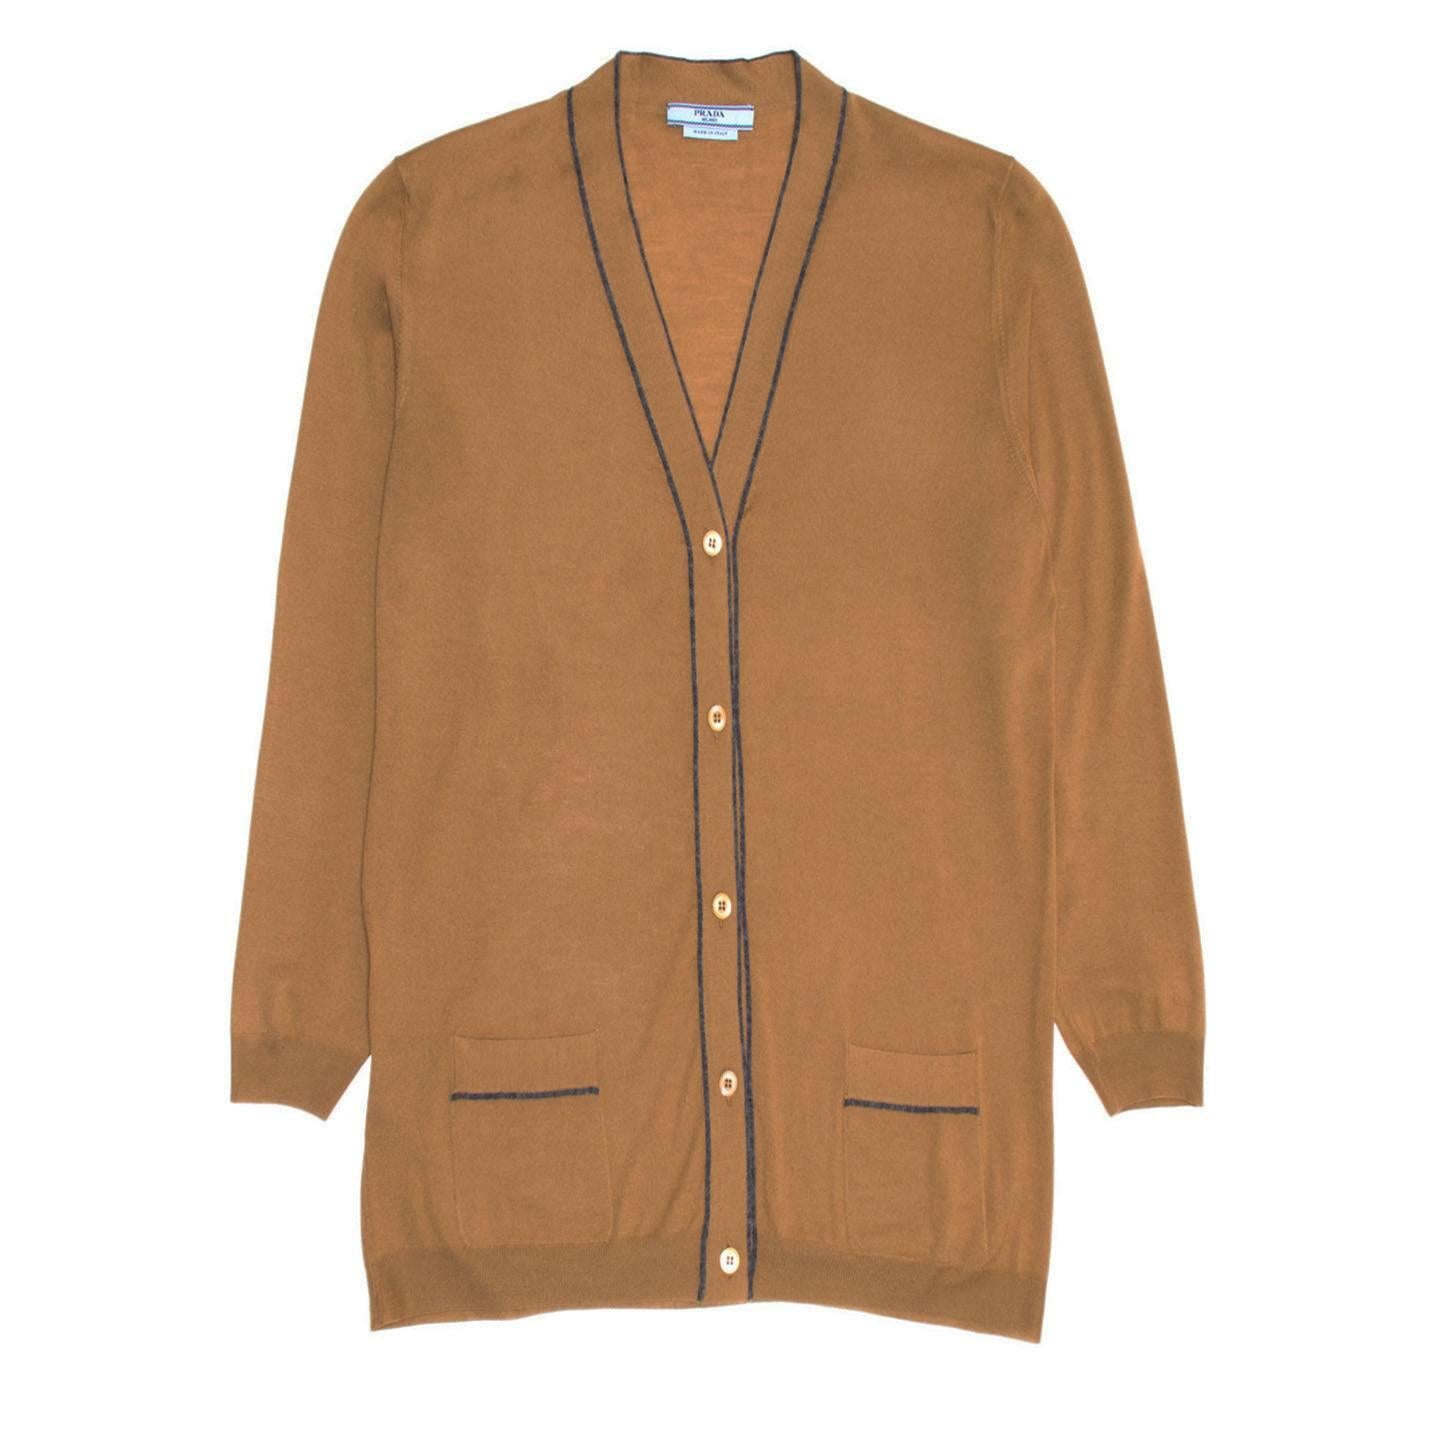 Prada caramel brown lightweight wool cardigan with V-neck and enriched by dark grey profiles around the neck, central front panels and pockets. The fit is straight and hip length. Made in Italy.

Size  46 Italian sizing

Condition  Excellent: never